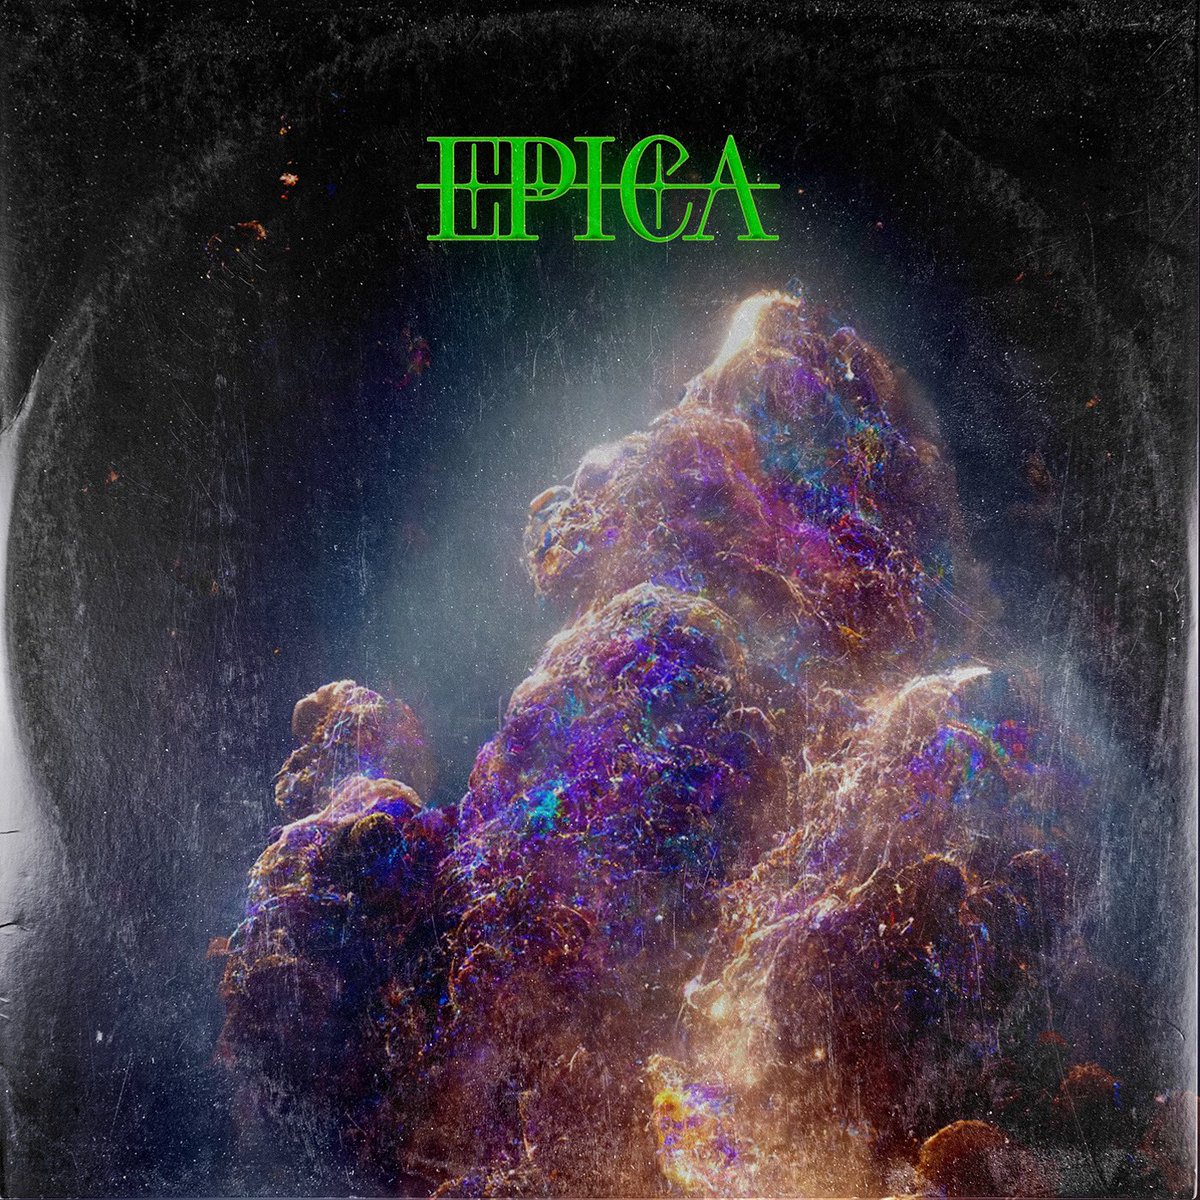 EPICA IS HERE ✨🔮✨ My new album is now available on Bandcamp! (& is coming soon to Spotify/ Apple). Personally I think this one is the best one I’ve created yet & I hope, if you get that chance to check it out, that you love it as much as I loved creating it 💜